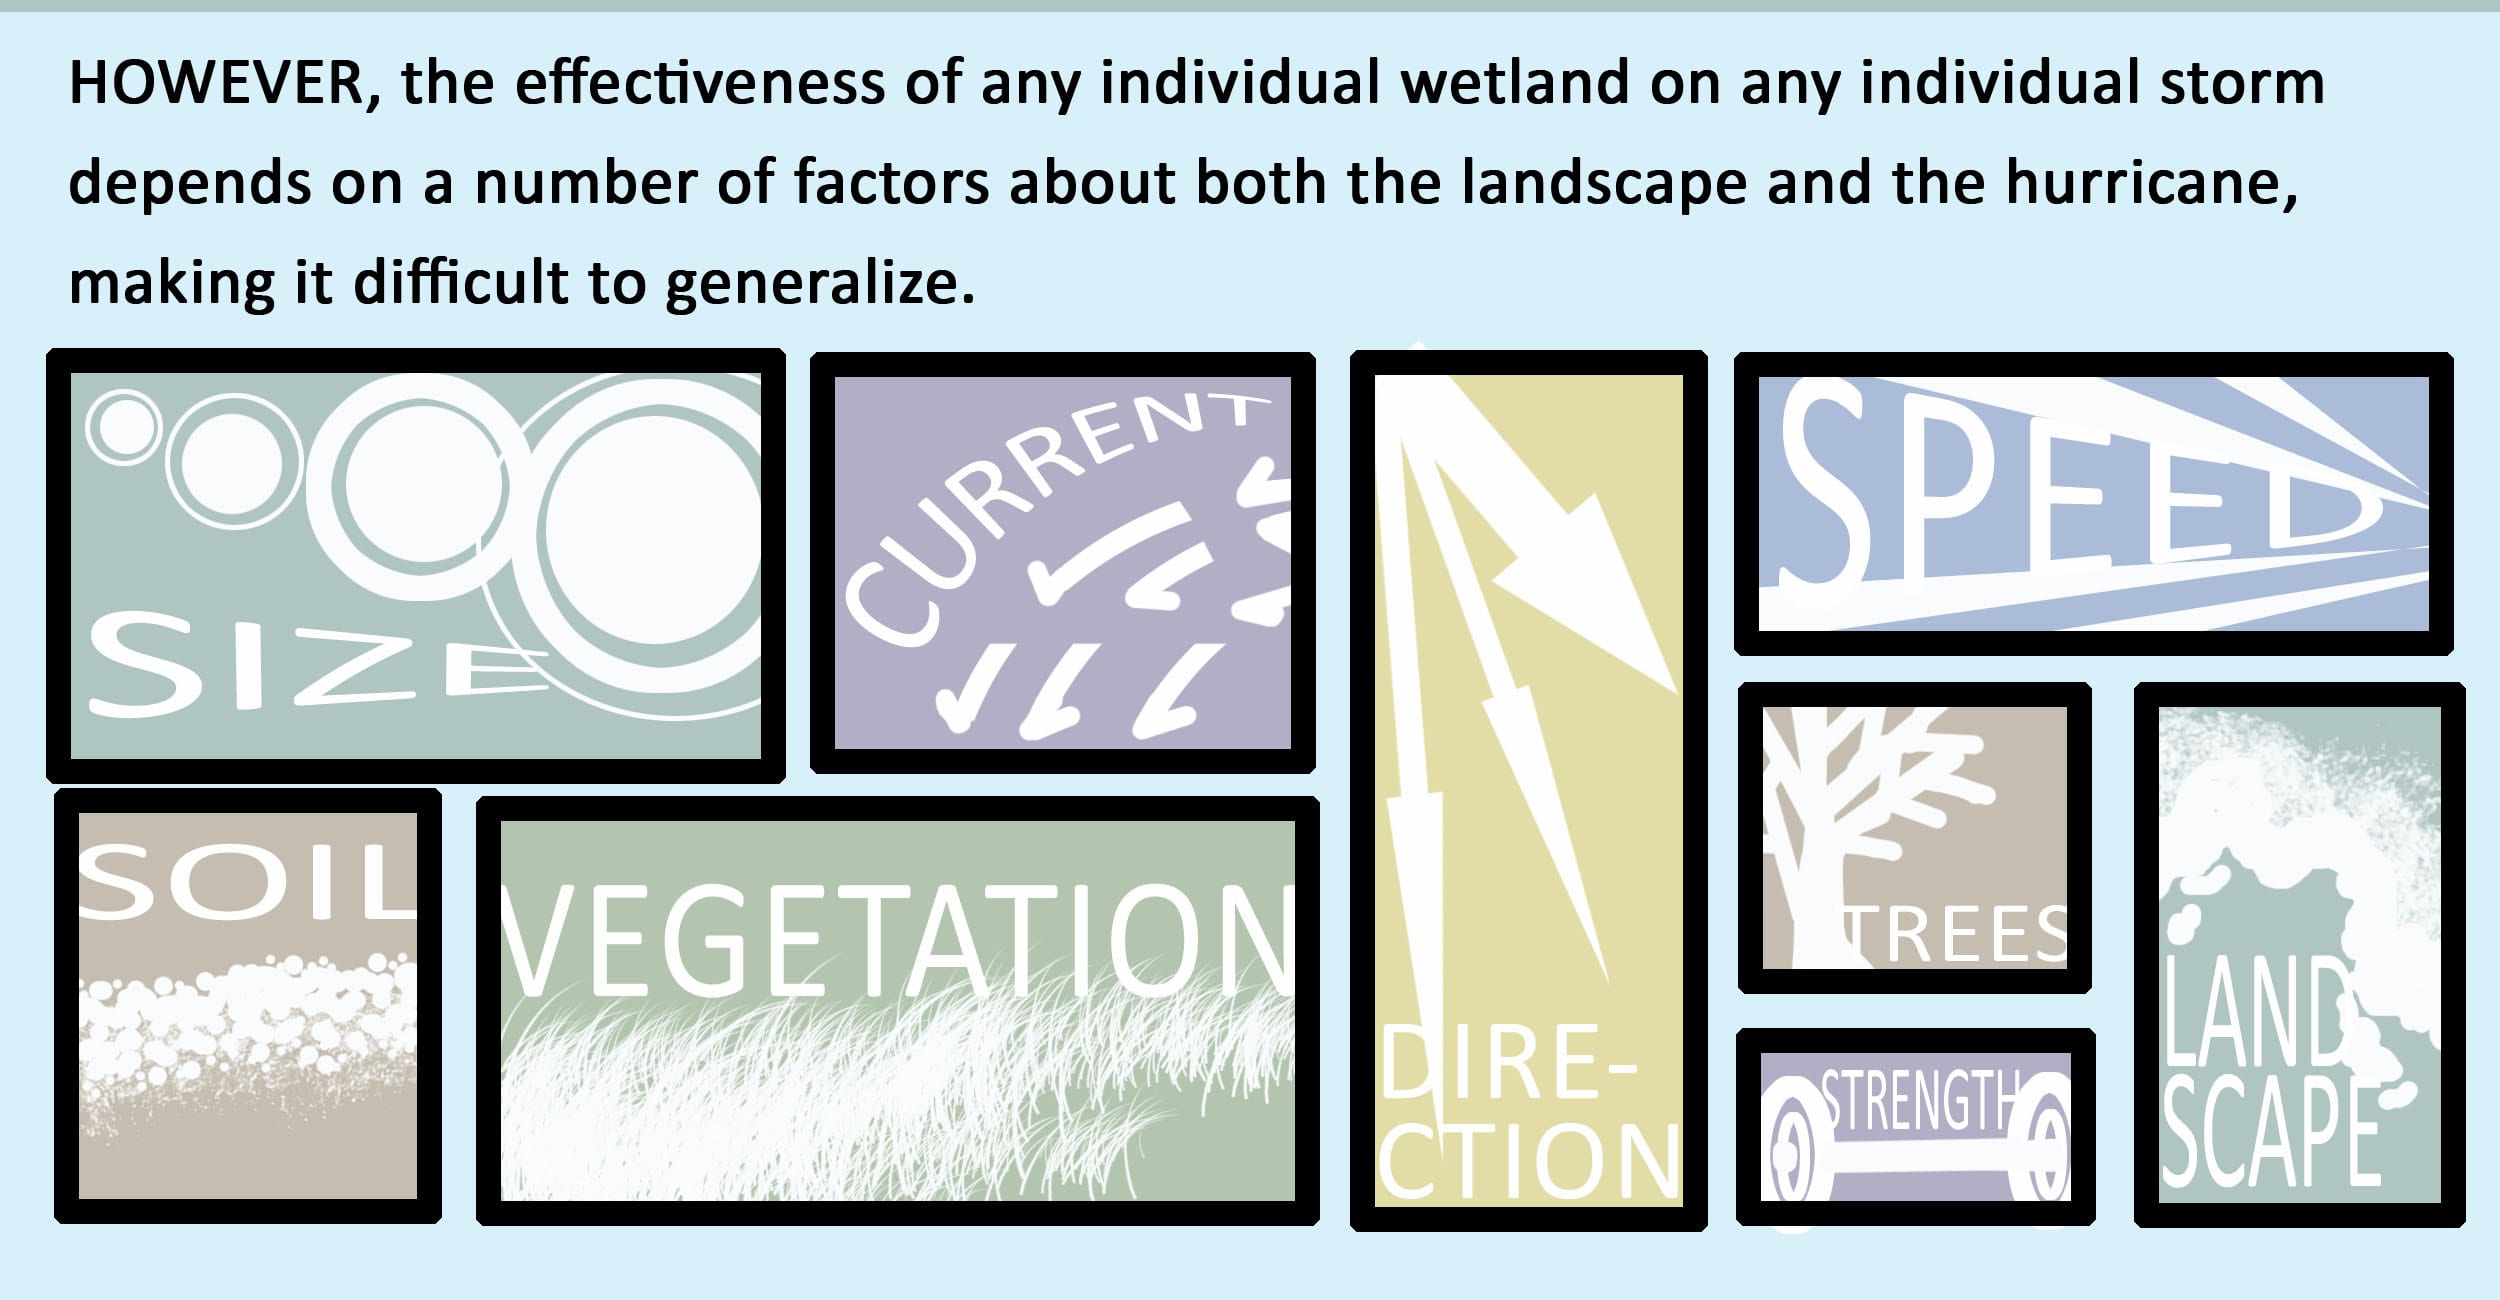 The effectiveness of wetlands on a storm depends on landscape and hurricane factors